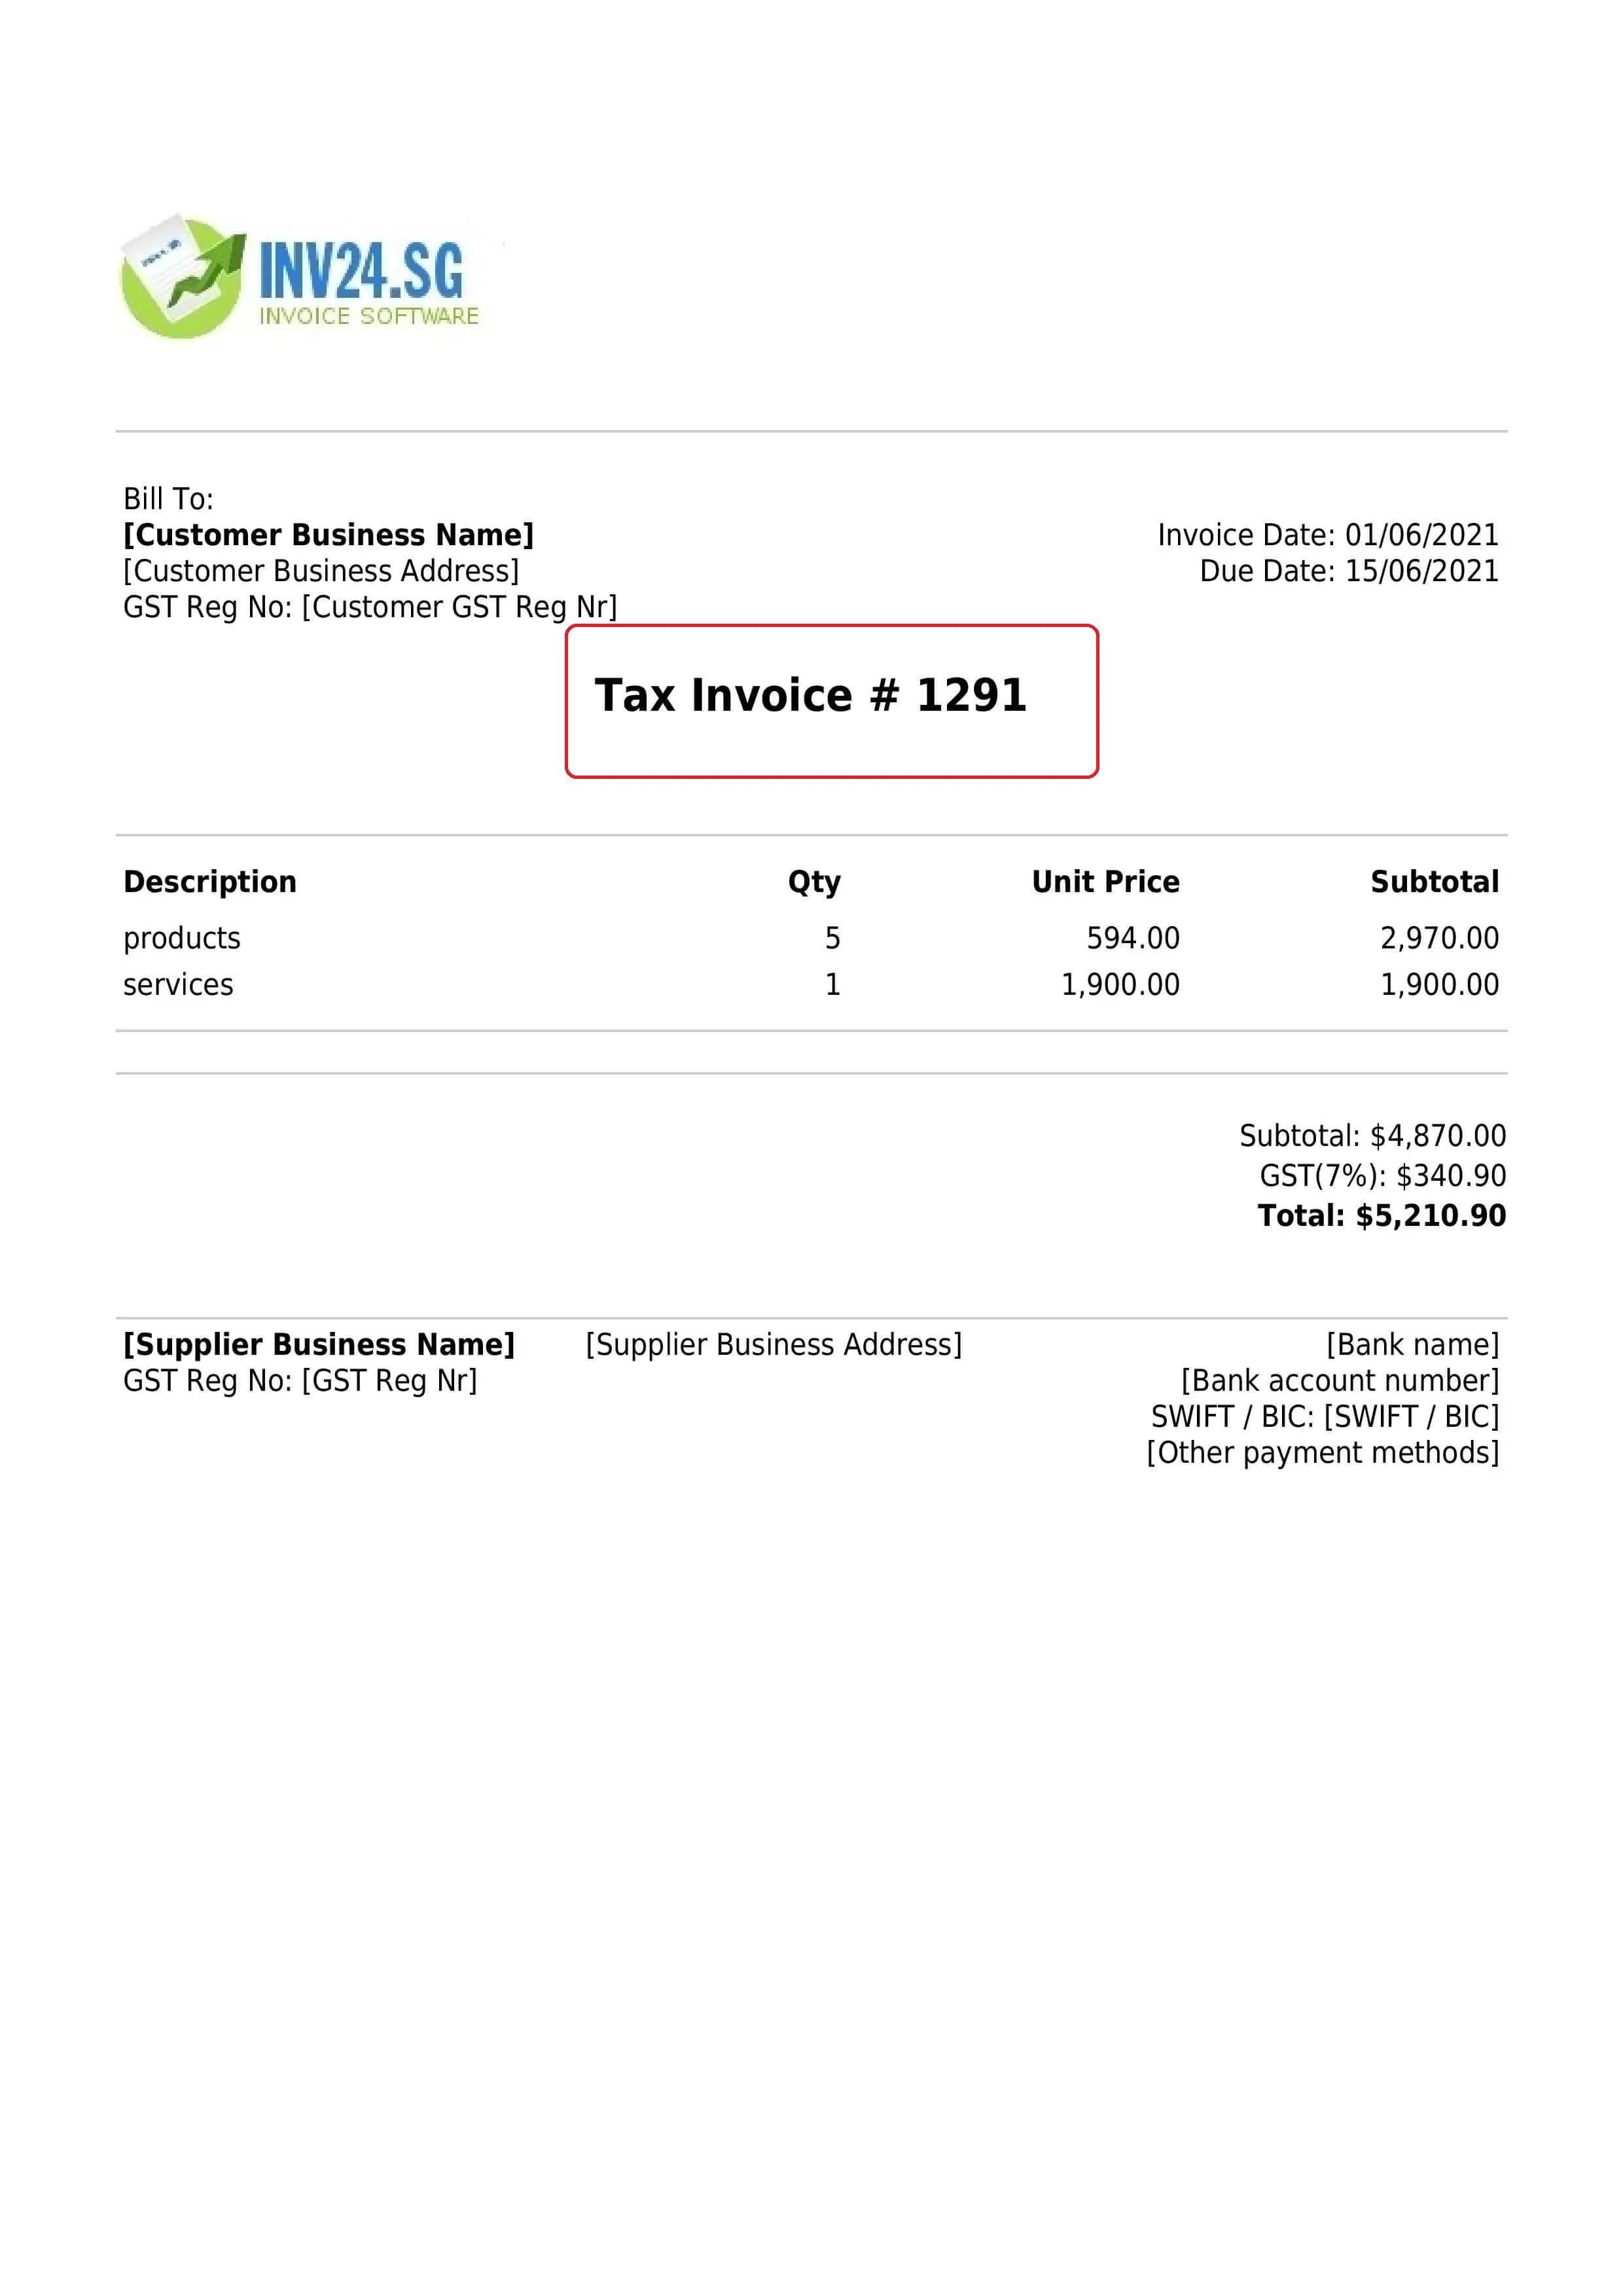 invoice number in Singapore